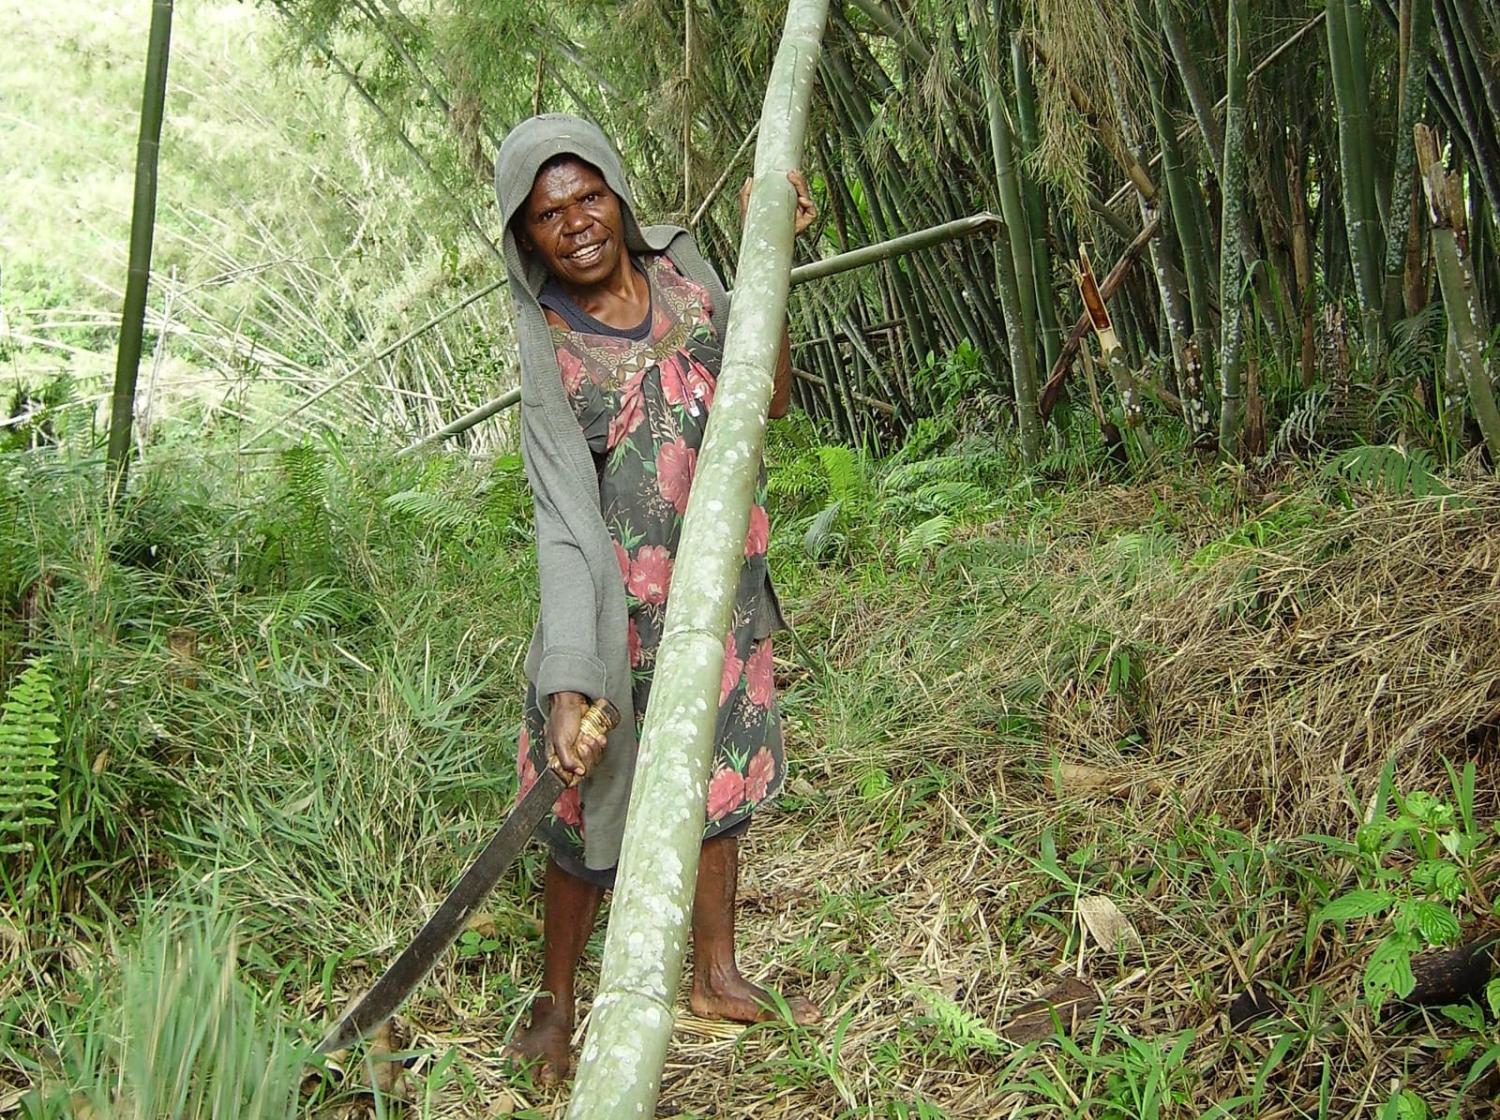 Rosalyn Ögate fells bamboo planted by her father, Ögate, in the Uruwa area, Saruwaged Mountains, PNG (Hannah Sarvasy)